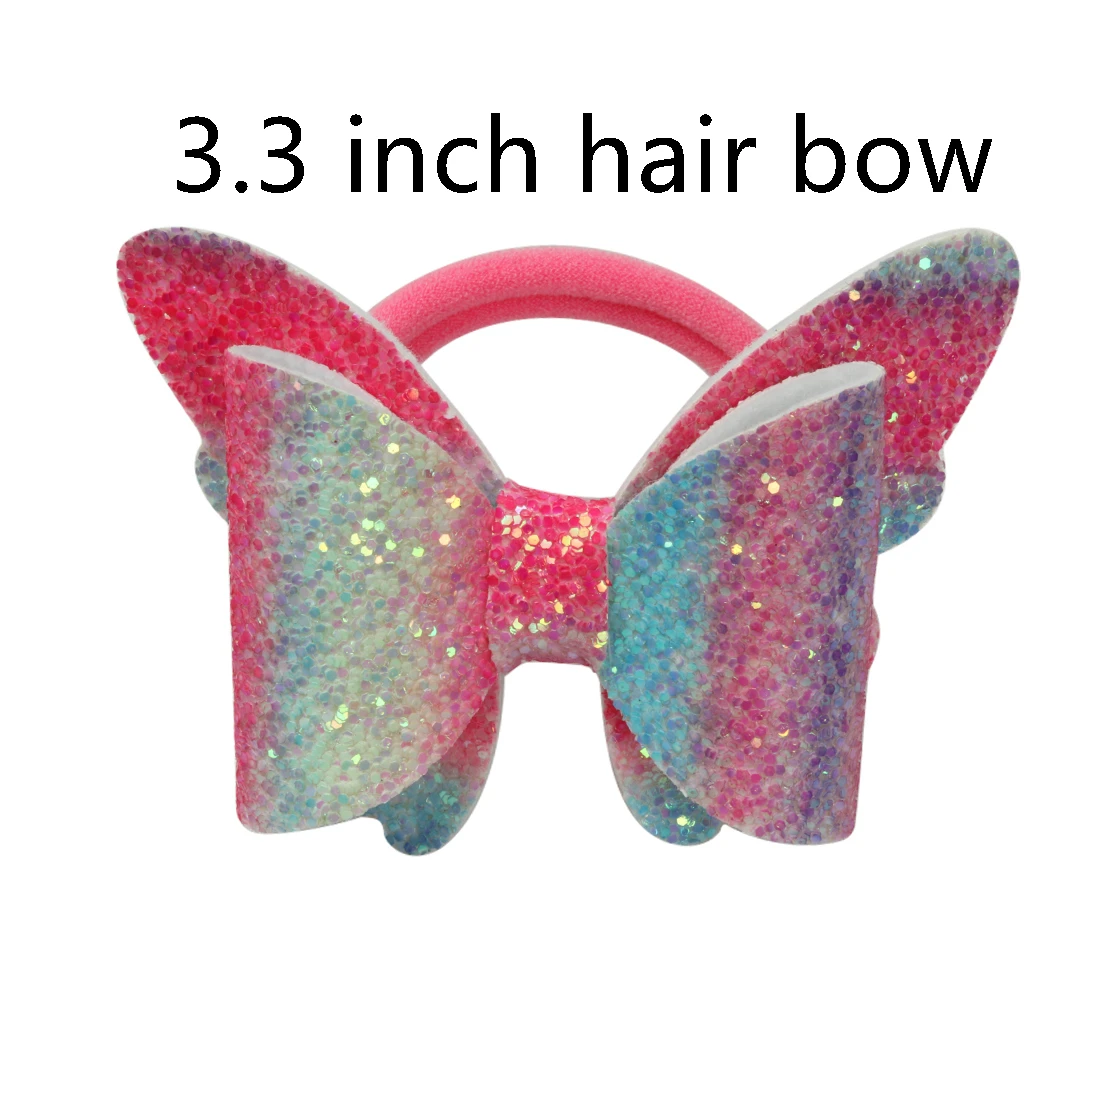 1 PC Child Hair Bow Tie Elastic Hair Band Glitter Hairbow Rope Rainbow Sequin Sparkly 3 Inch Bows Mermaid Girls Sweet Headwear - Цвет: butterfly-5